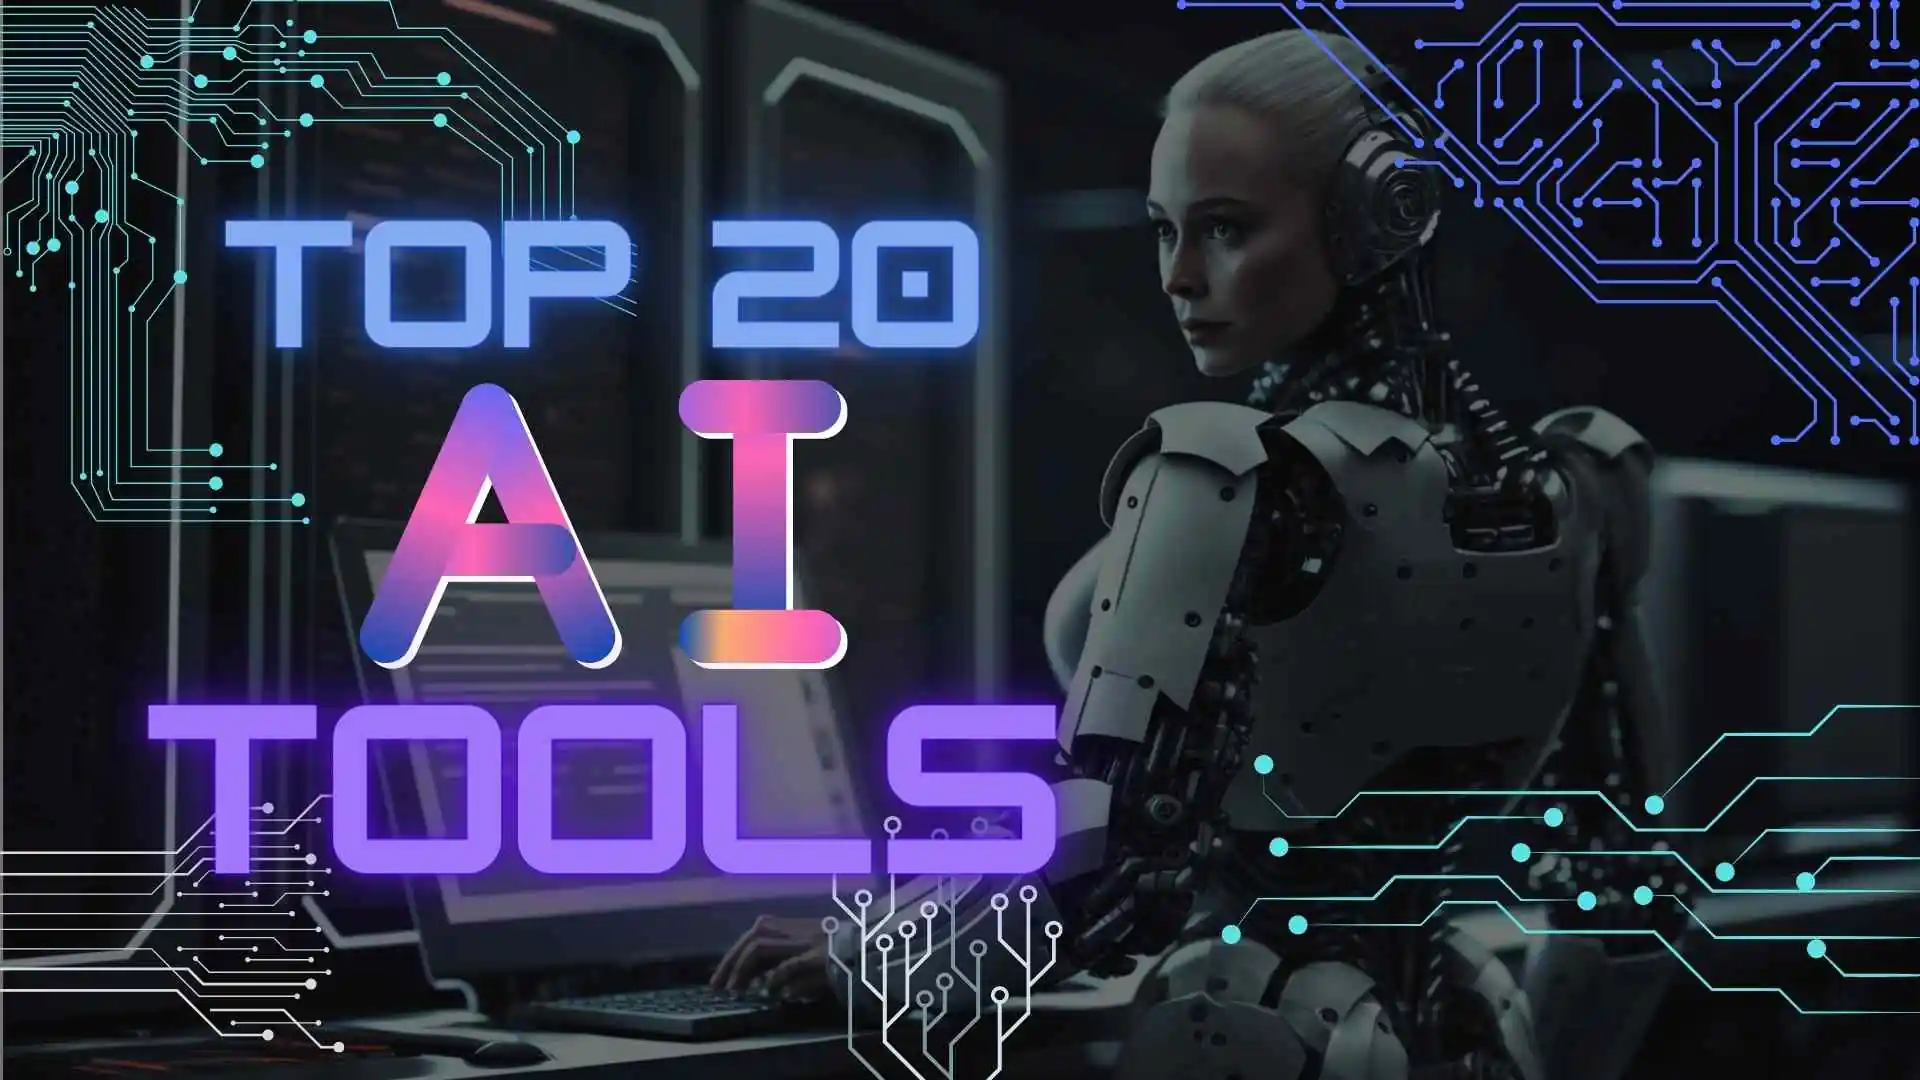 Revolutionize Your Business or Personal Projects with These Top 20 Free AI Tools Available Online!